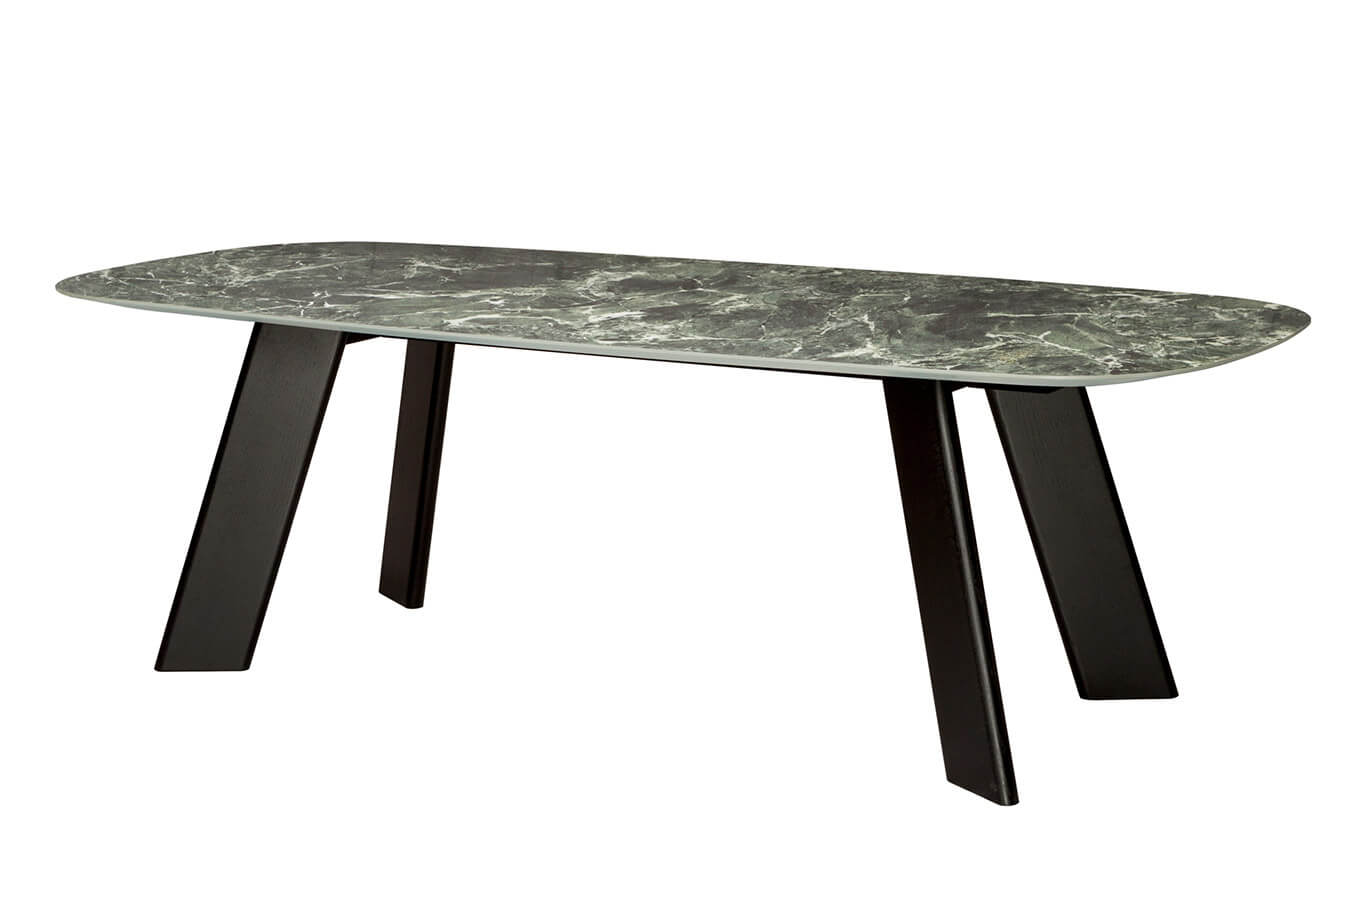 Alhambra c cer 001 dining table, with ceramic top